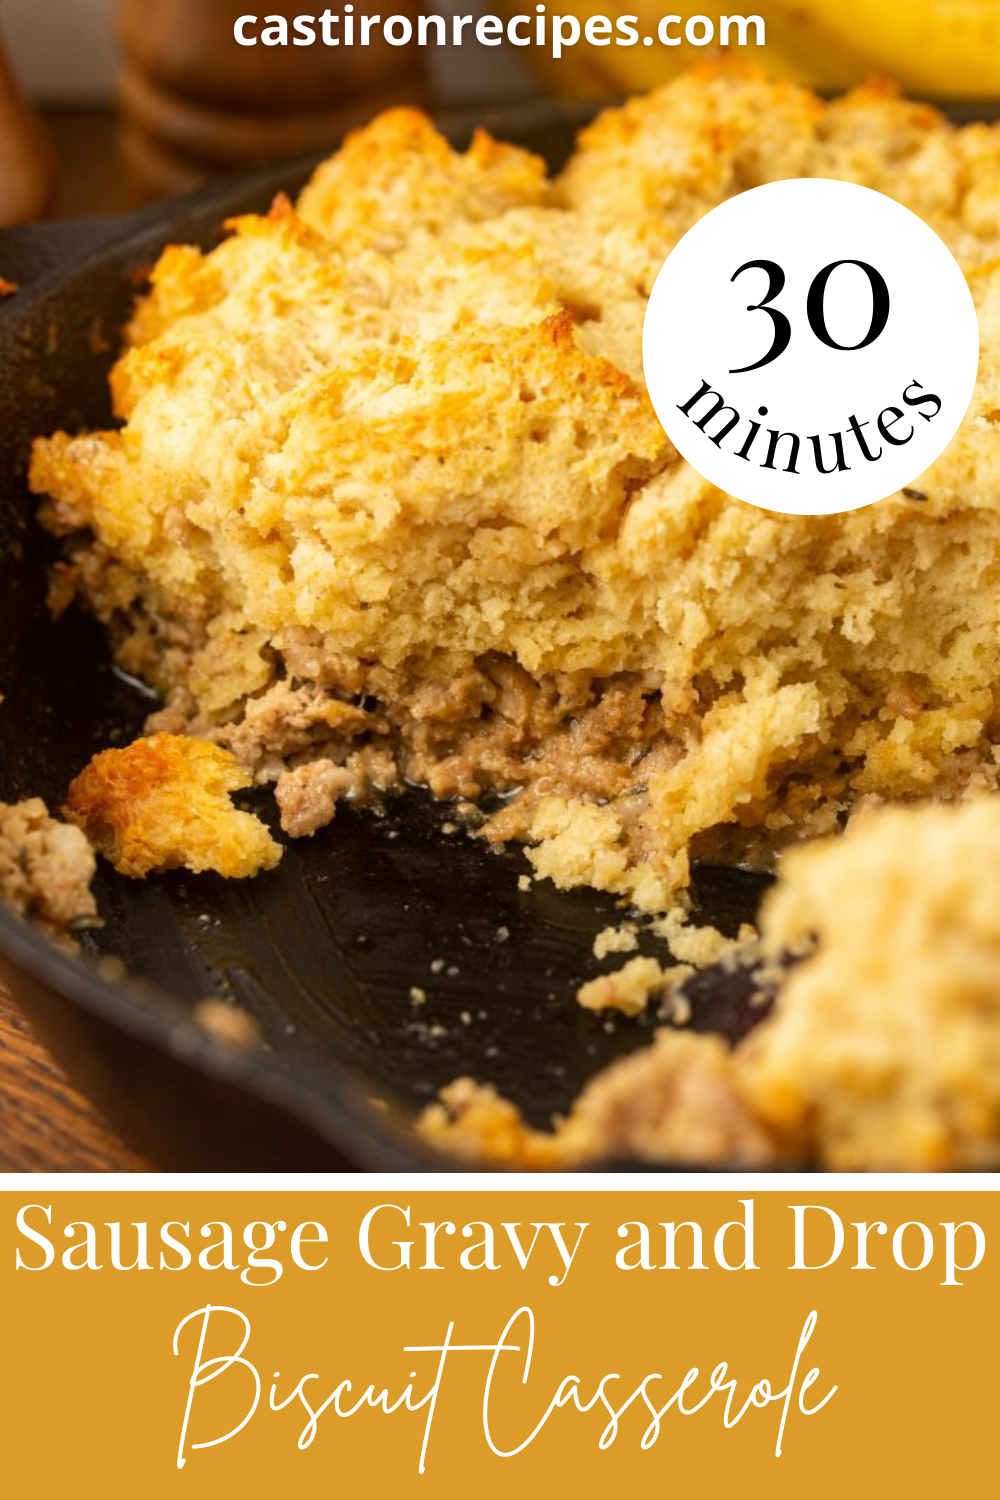 pin image of sausage gravy and biscuit casserole